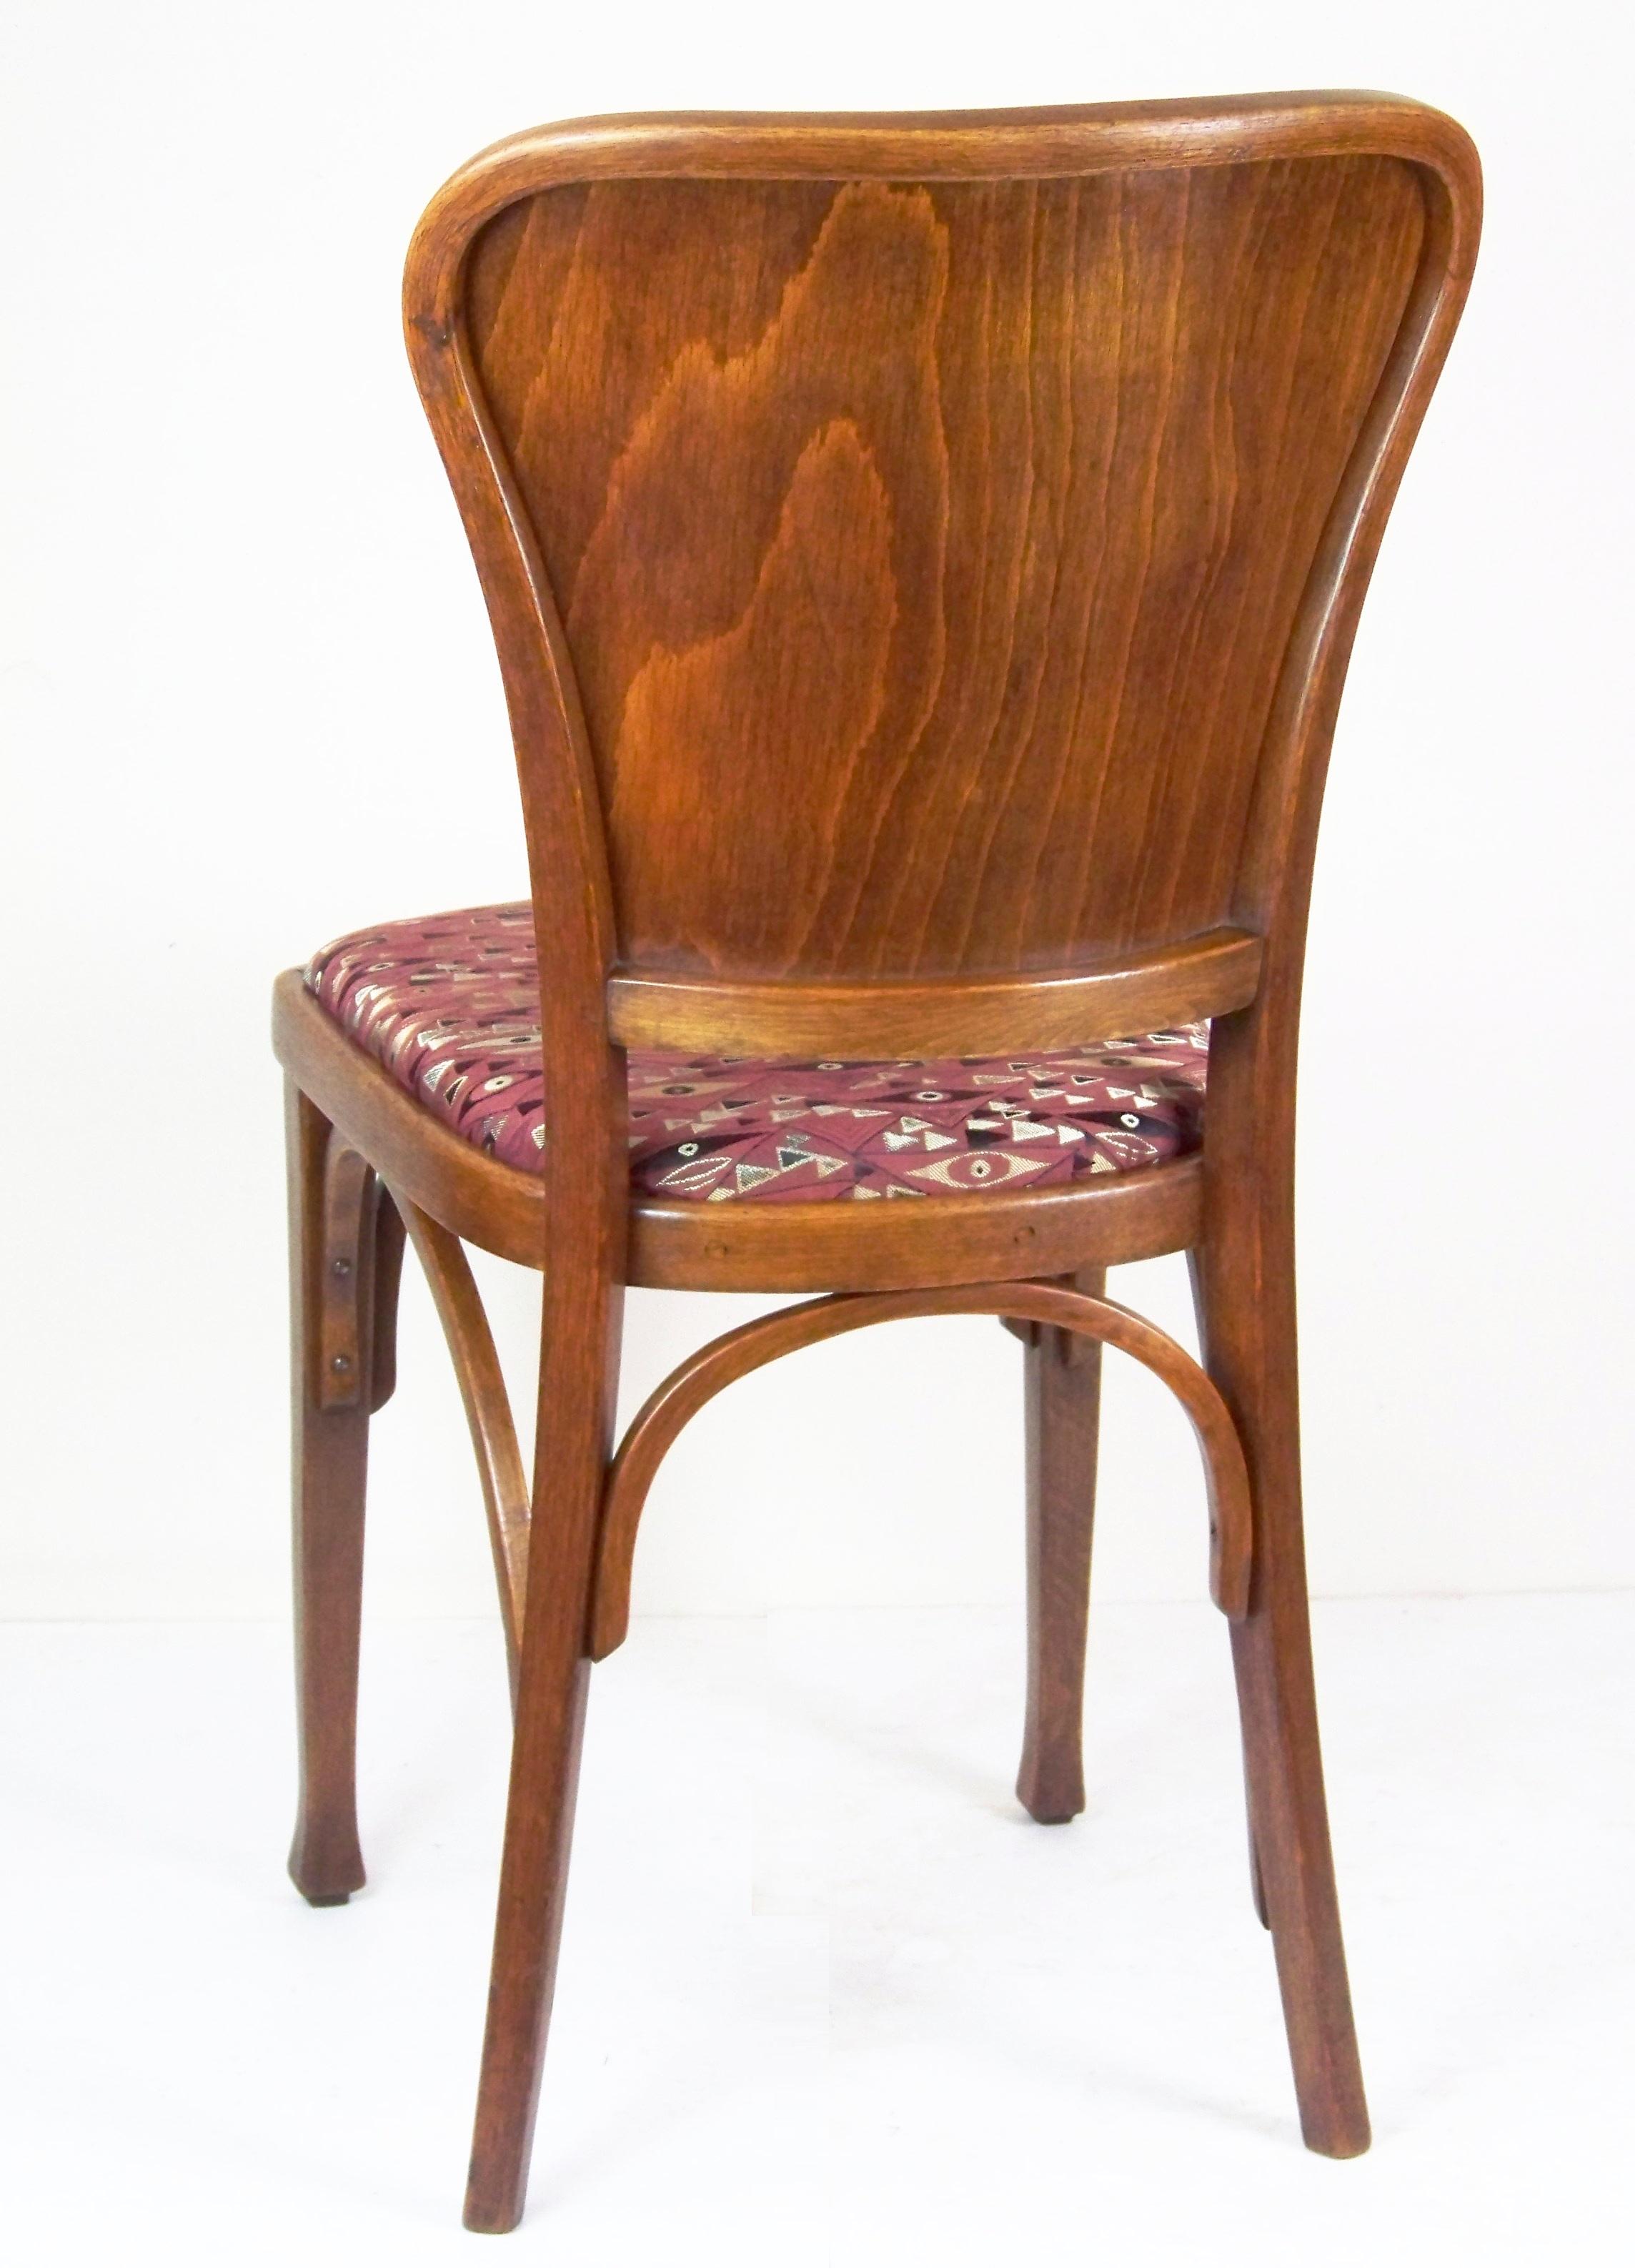 Perfect original condition, really exceptionally well preserved. Only the upholstery is new, with woven decor inspired by Gustav Klimt paintings. The wooden bases were perfectly cleaned and polished with shellac polish. The chair first appeared at